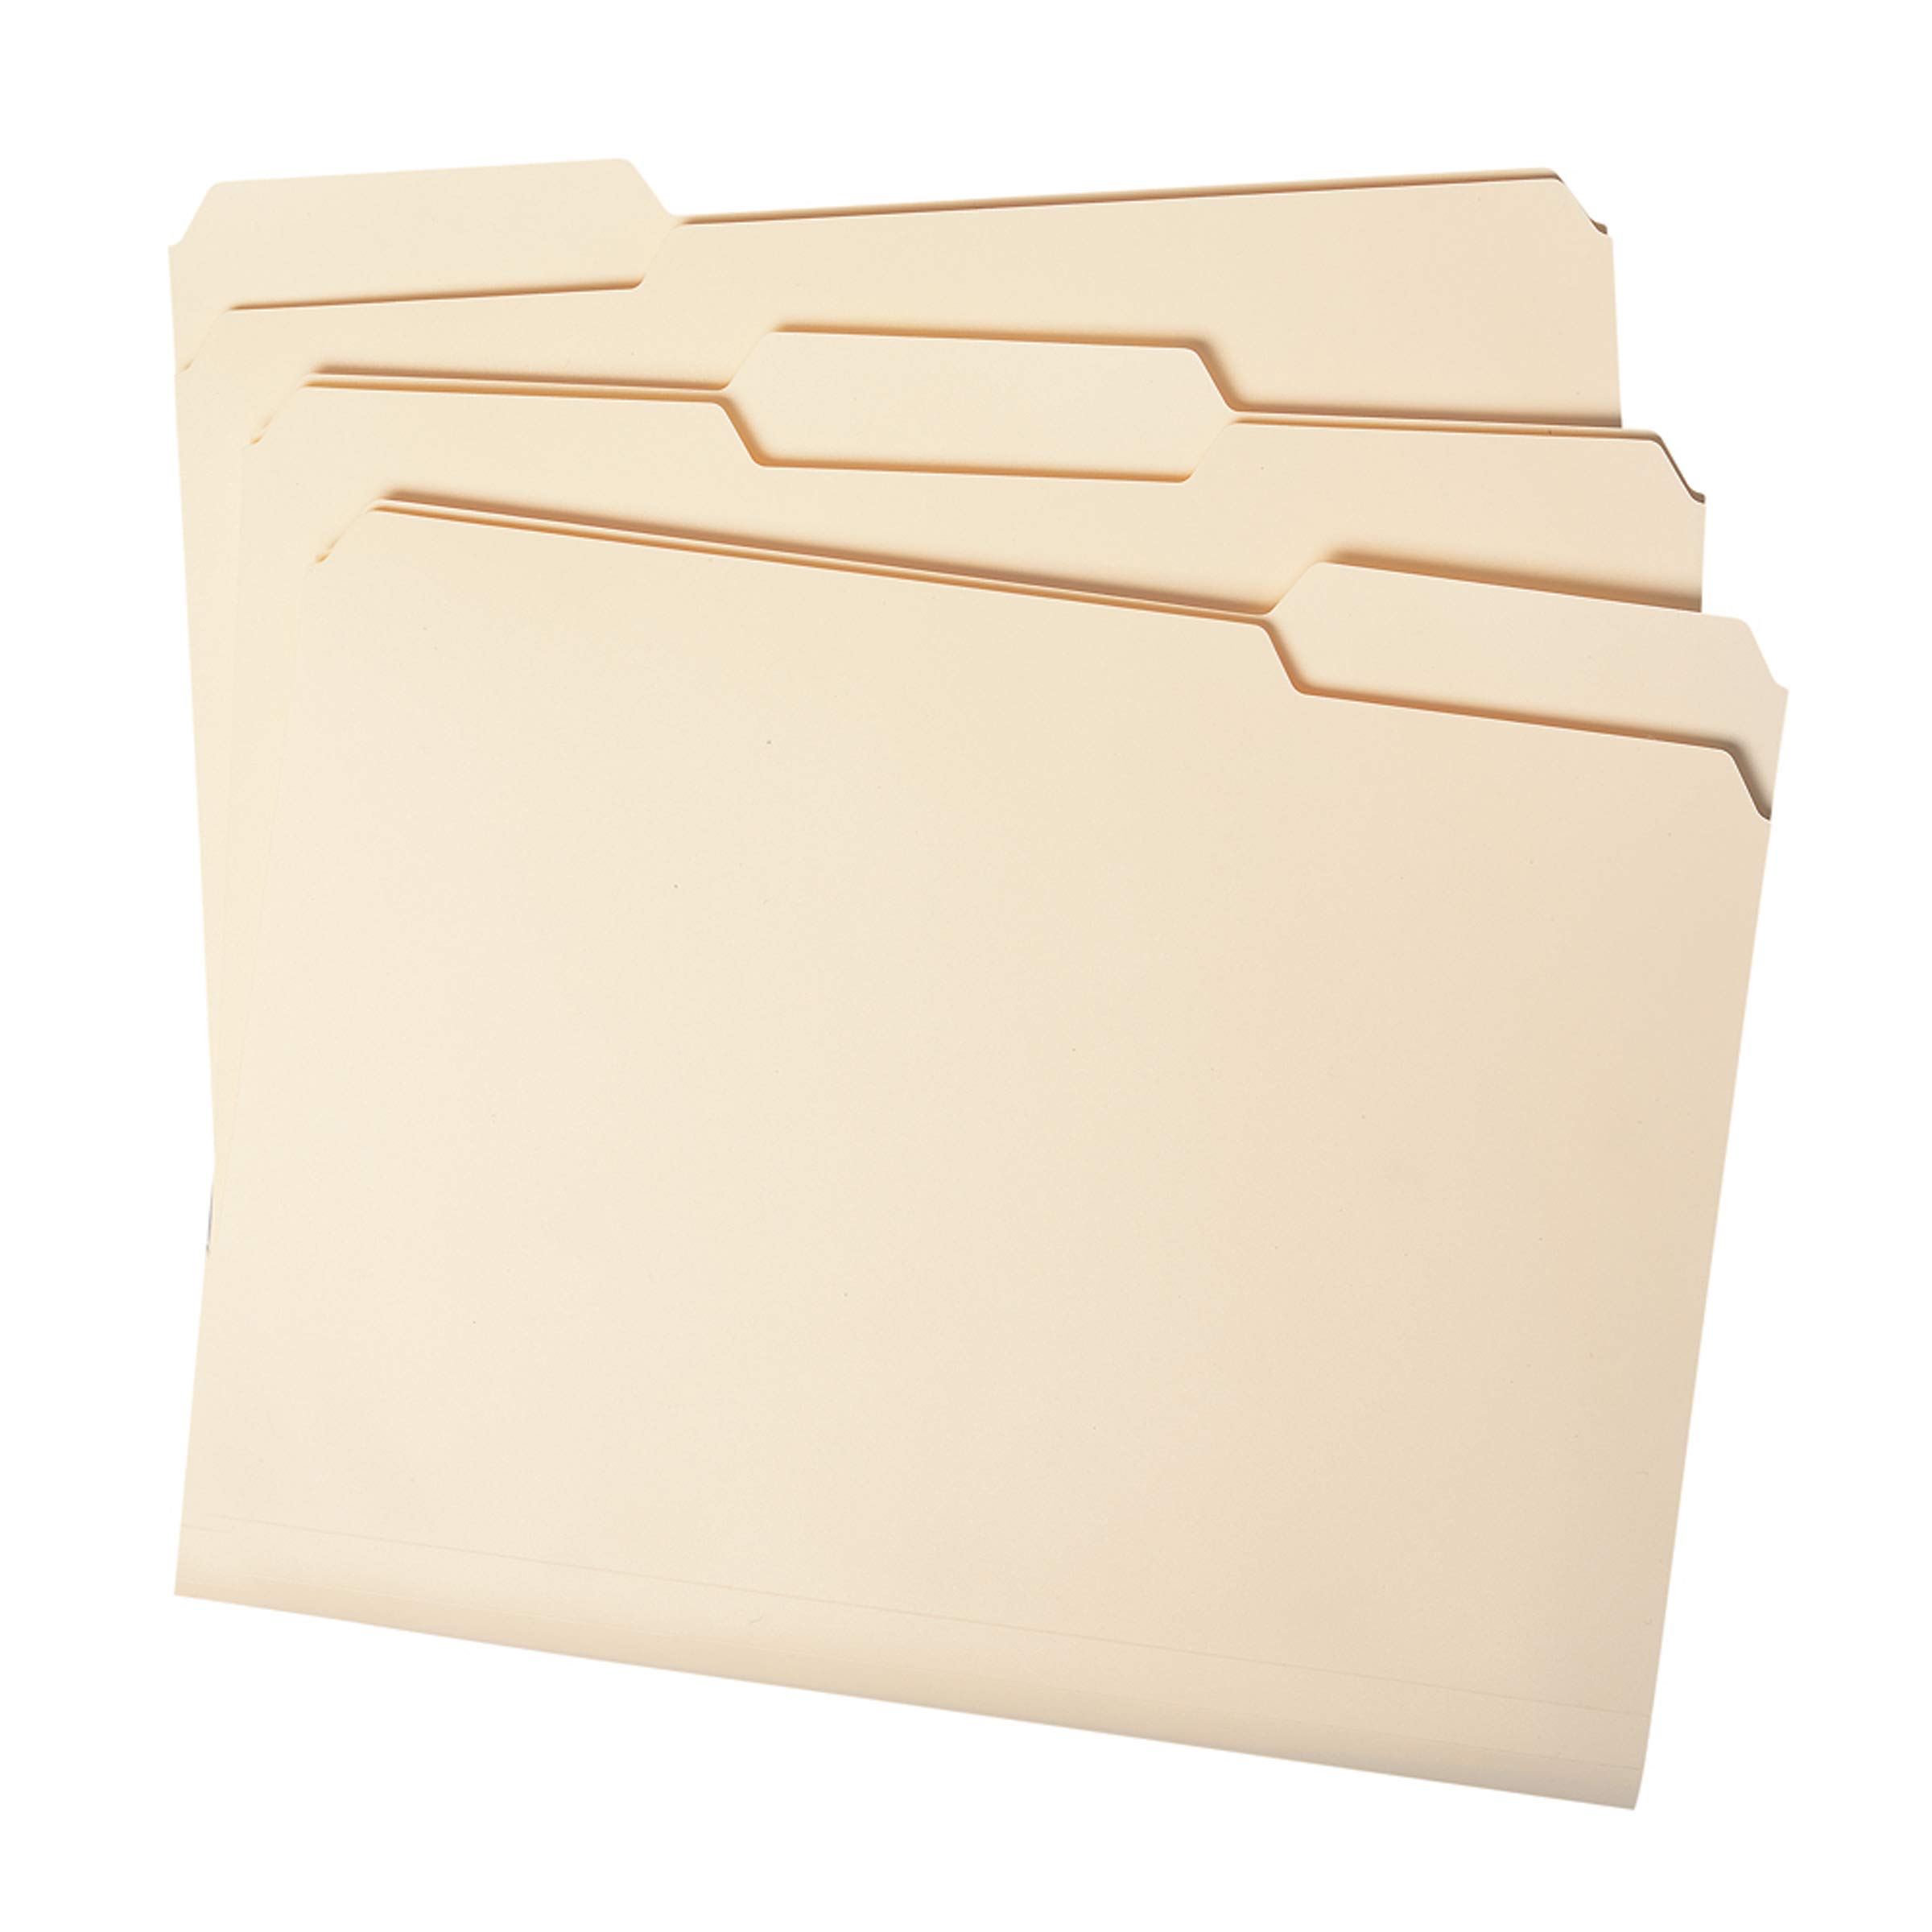 Amazon Basics 1/3-Cut Tab, Assorted Positions File Folders, Letter Size, Manila - Pack of 100